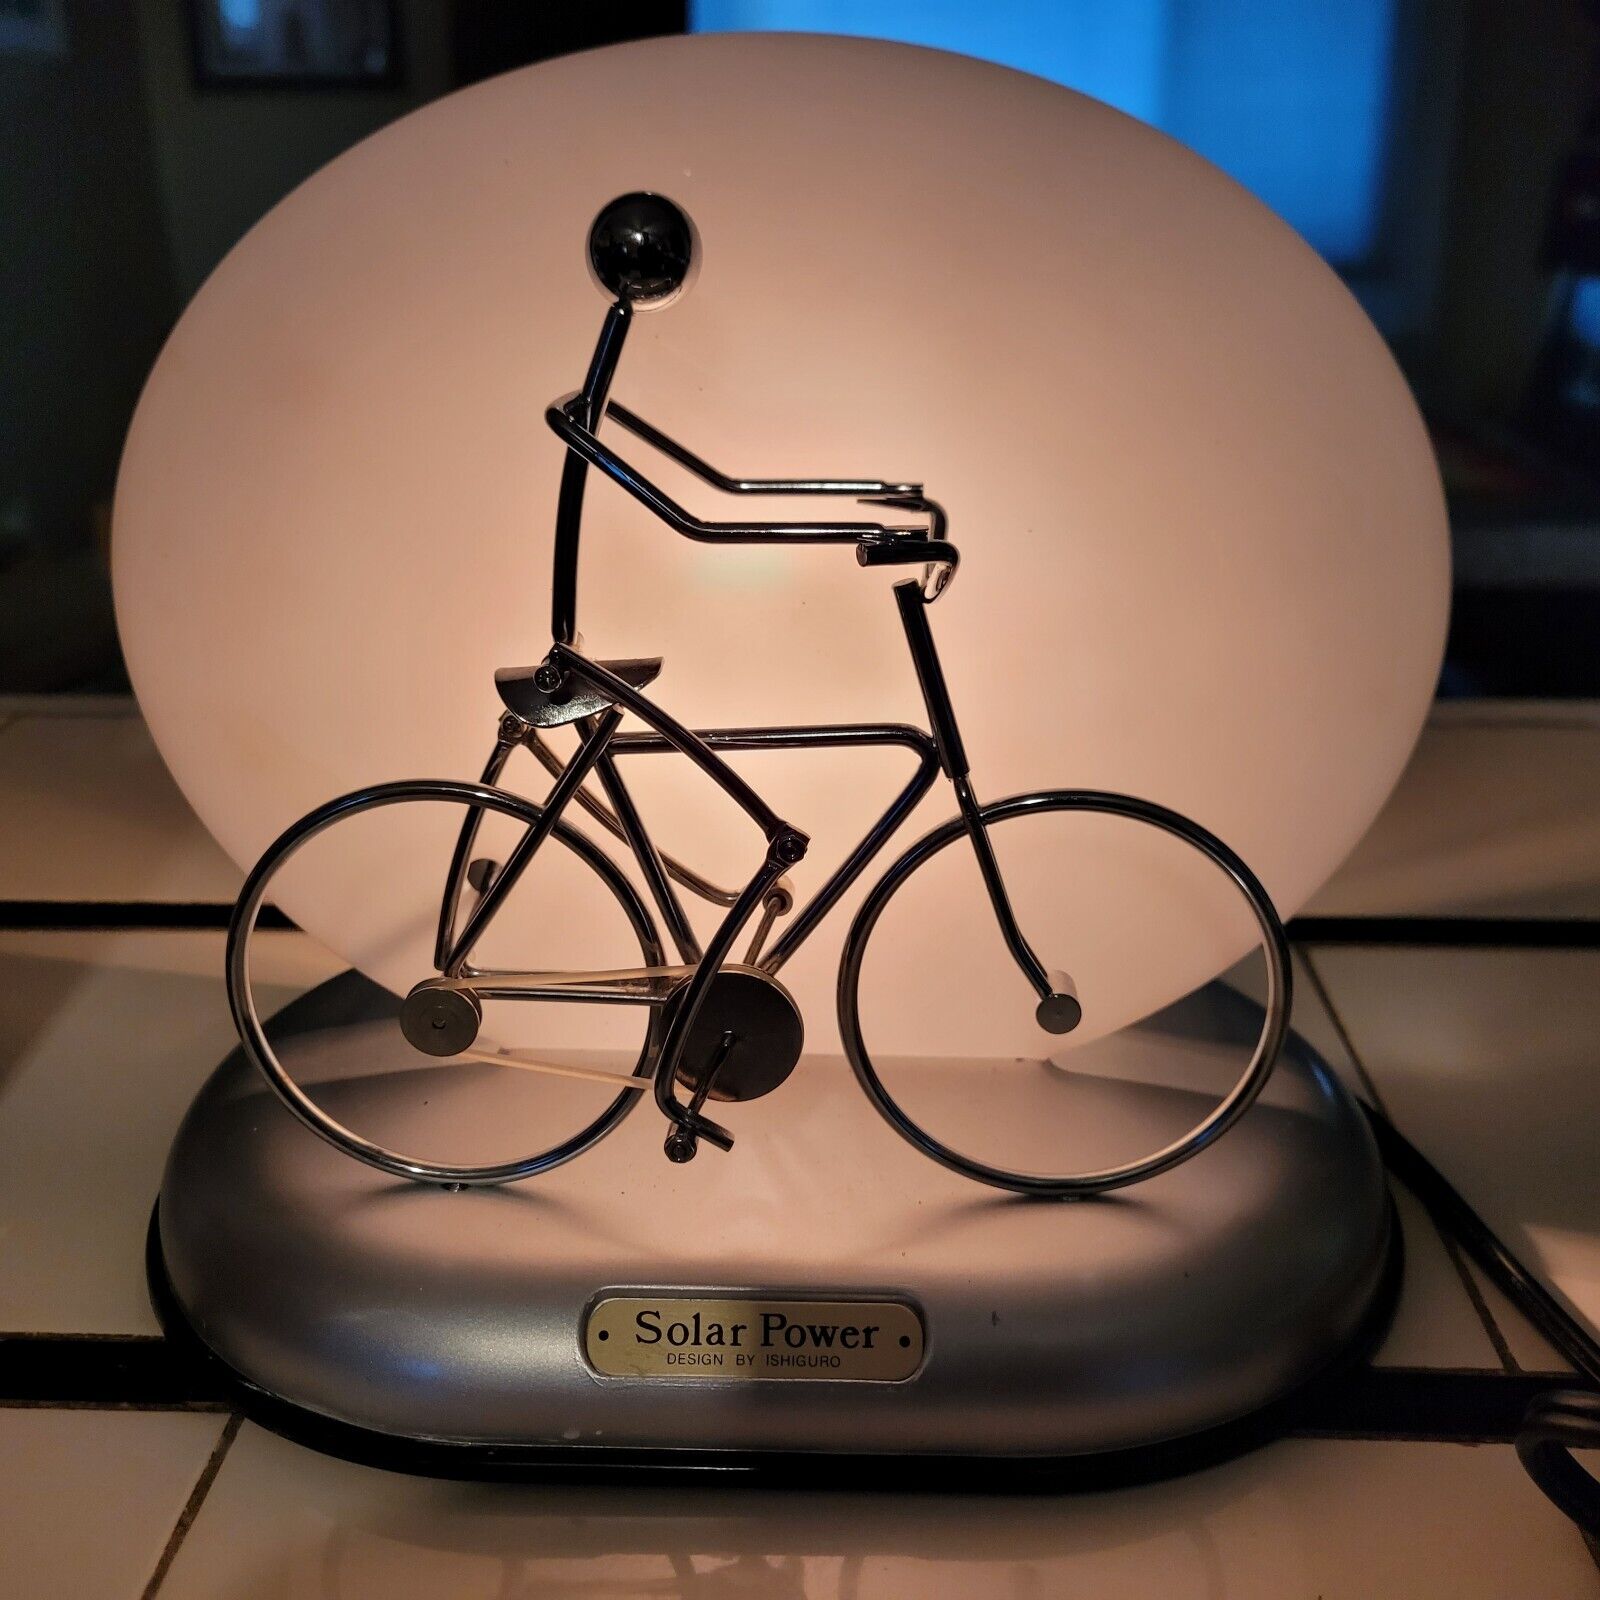 Vintage Solar Power by Ishiguro - Motion Man Pedaling Bicycle Bike Table Lamp